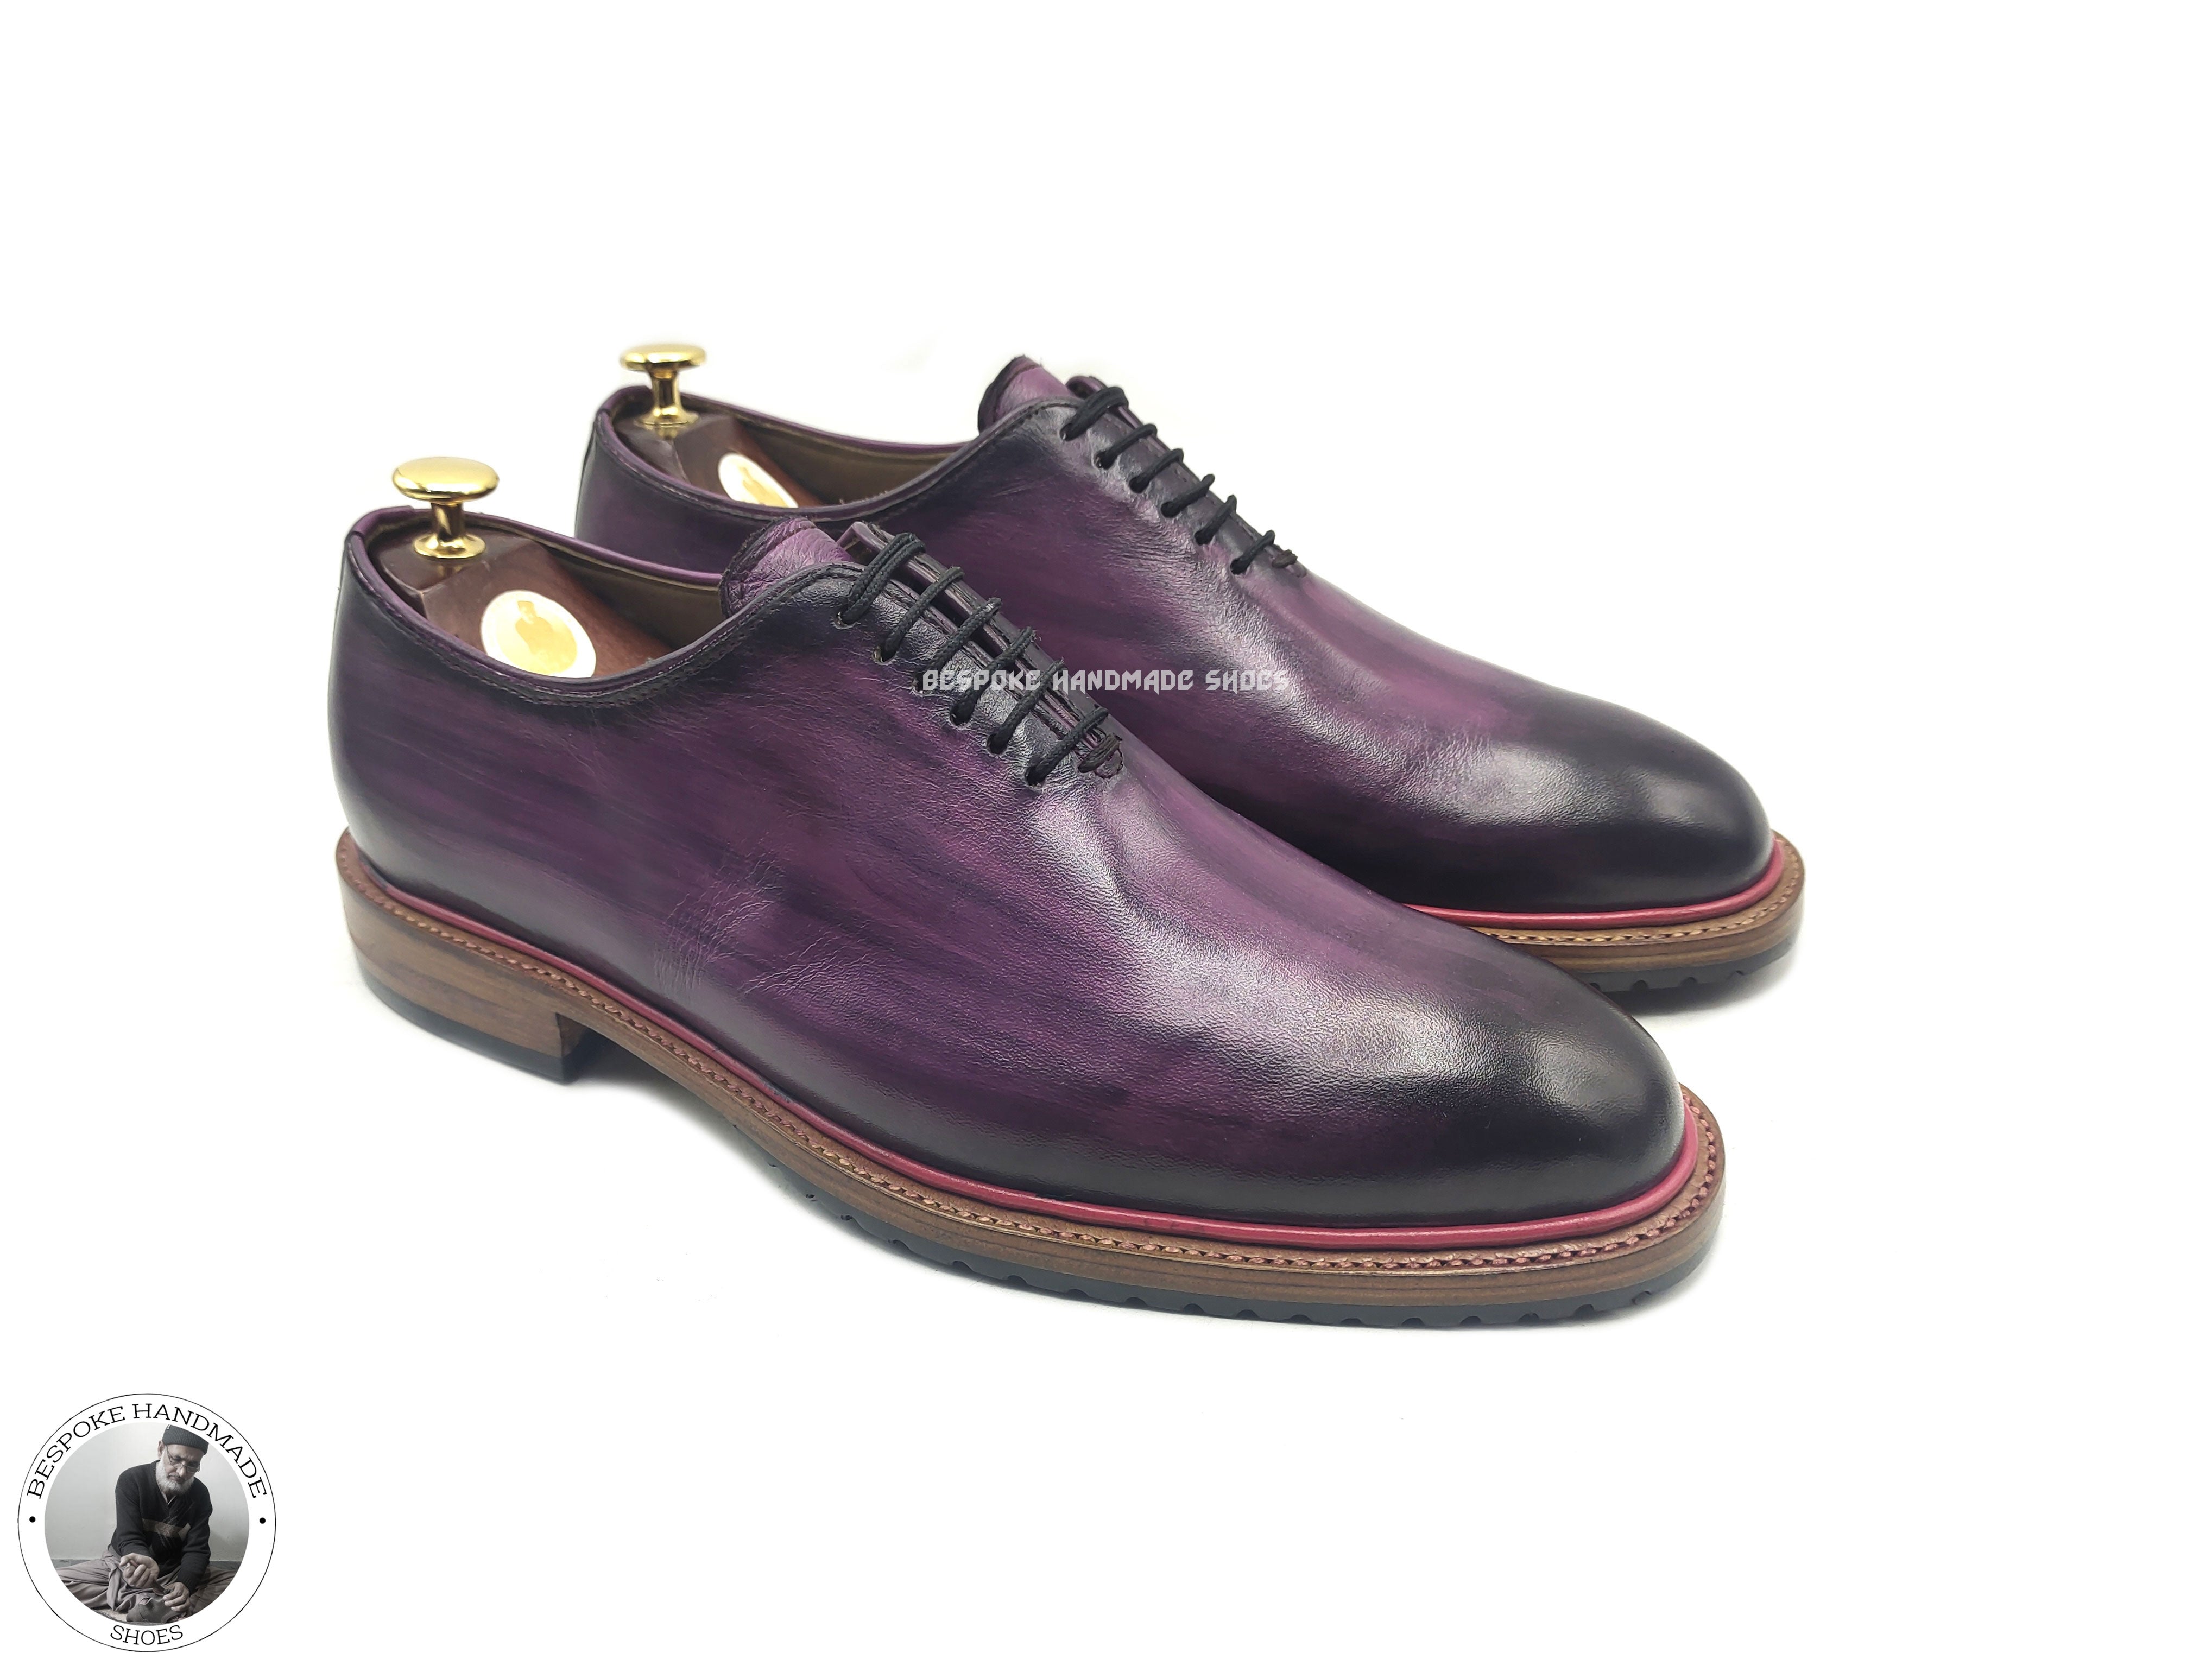 Custom Made Pure Handmade Purple Leather Black Shaded Lace Up Oxford Shoes For Men, Wholecut Shoes For Men's